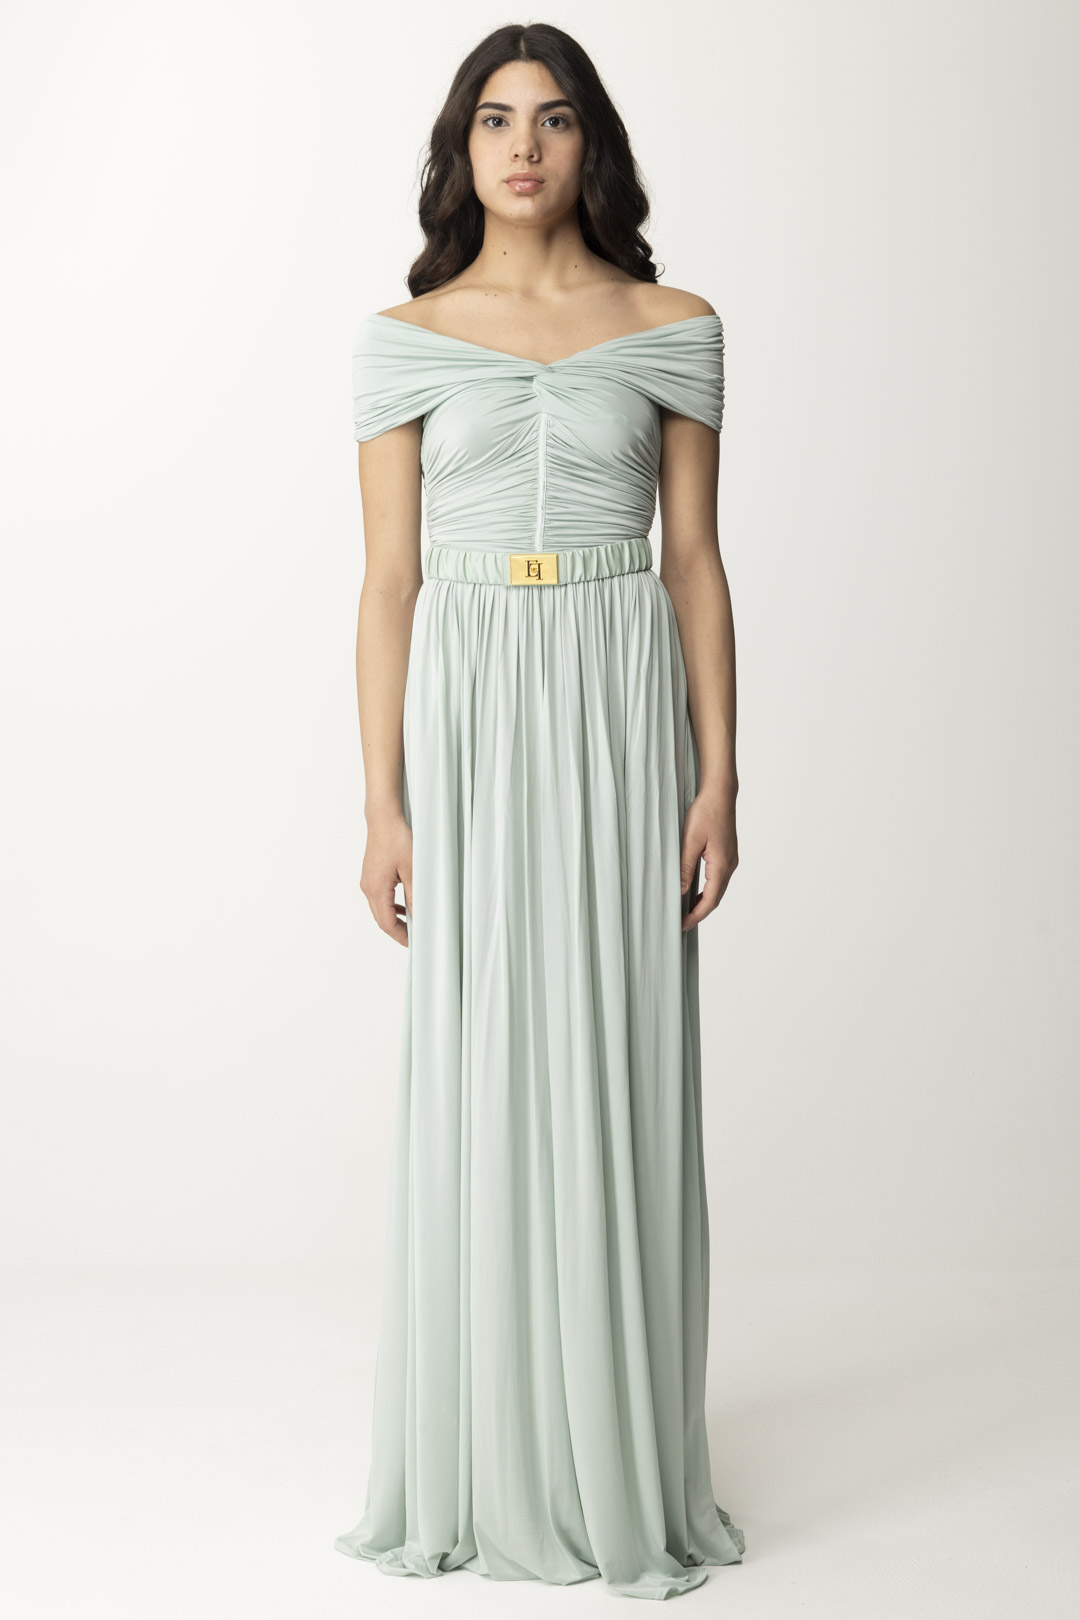 Preview: Elisabetta Franchi Red Carpet Dress with Knot and Belt ACQUA